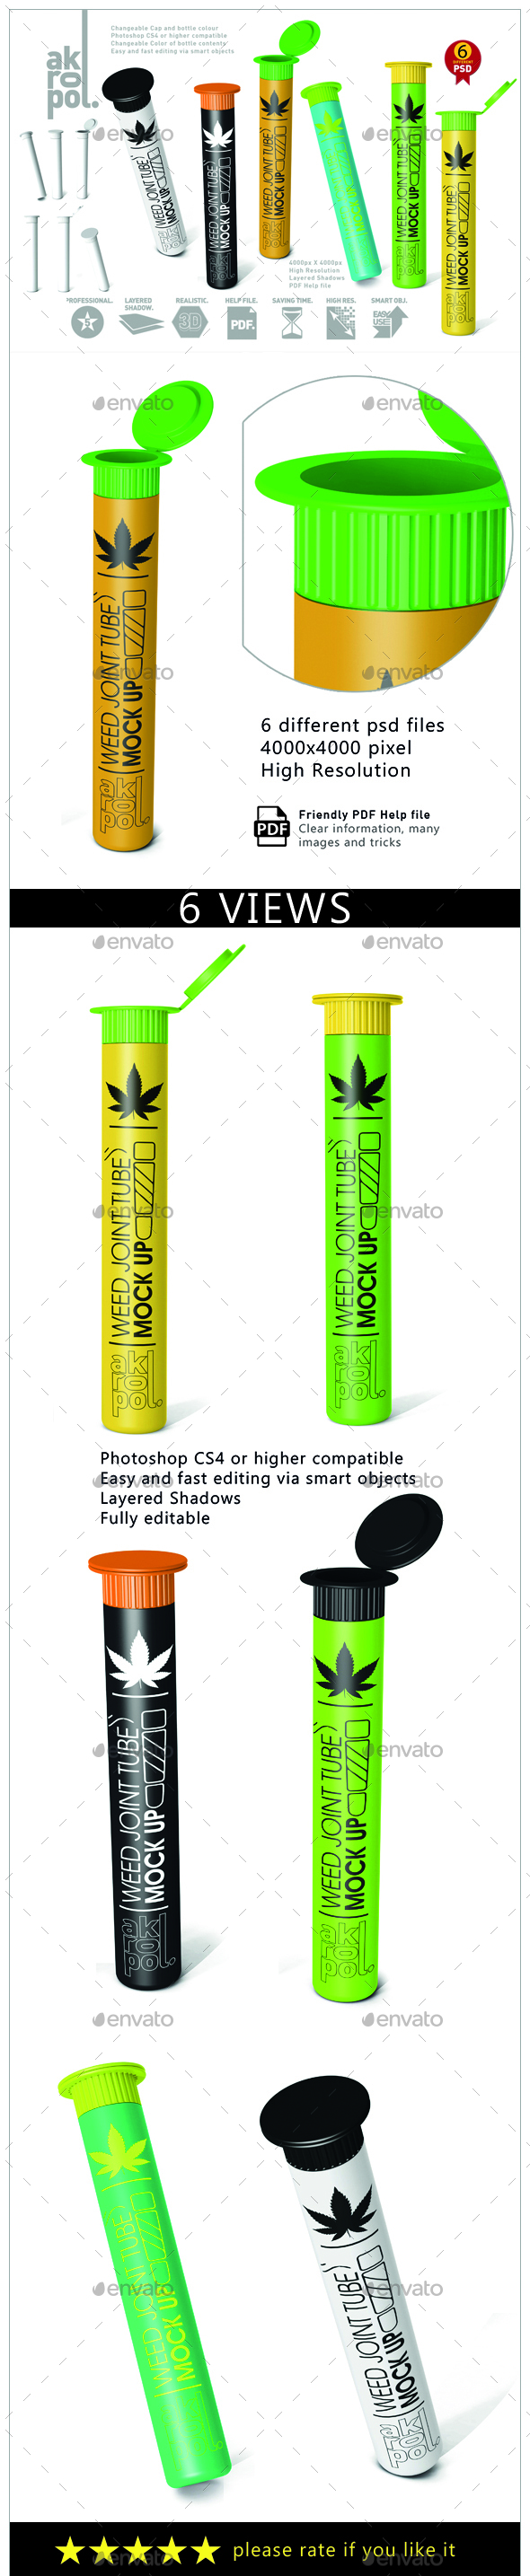 Weed Joint Pre Roll Plastic Tube, Graphics